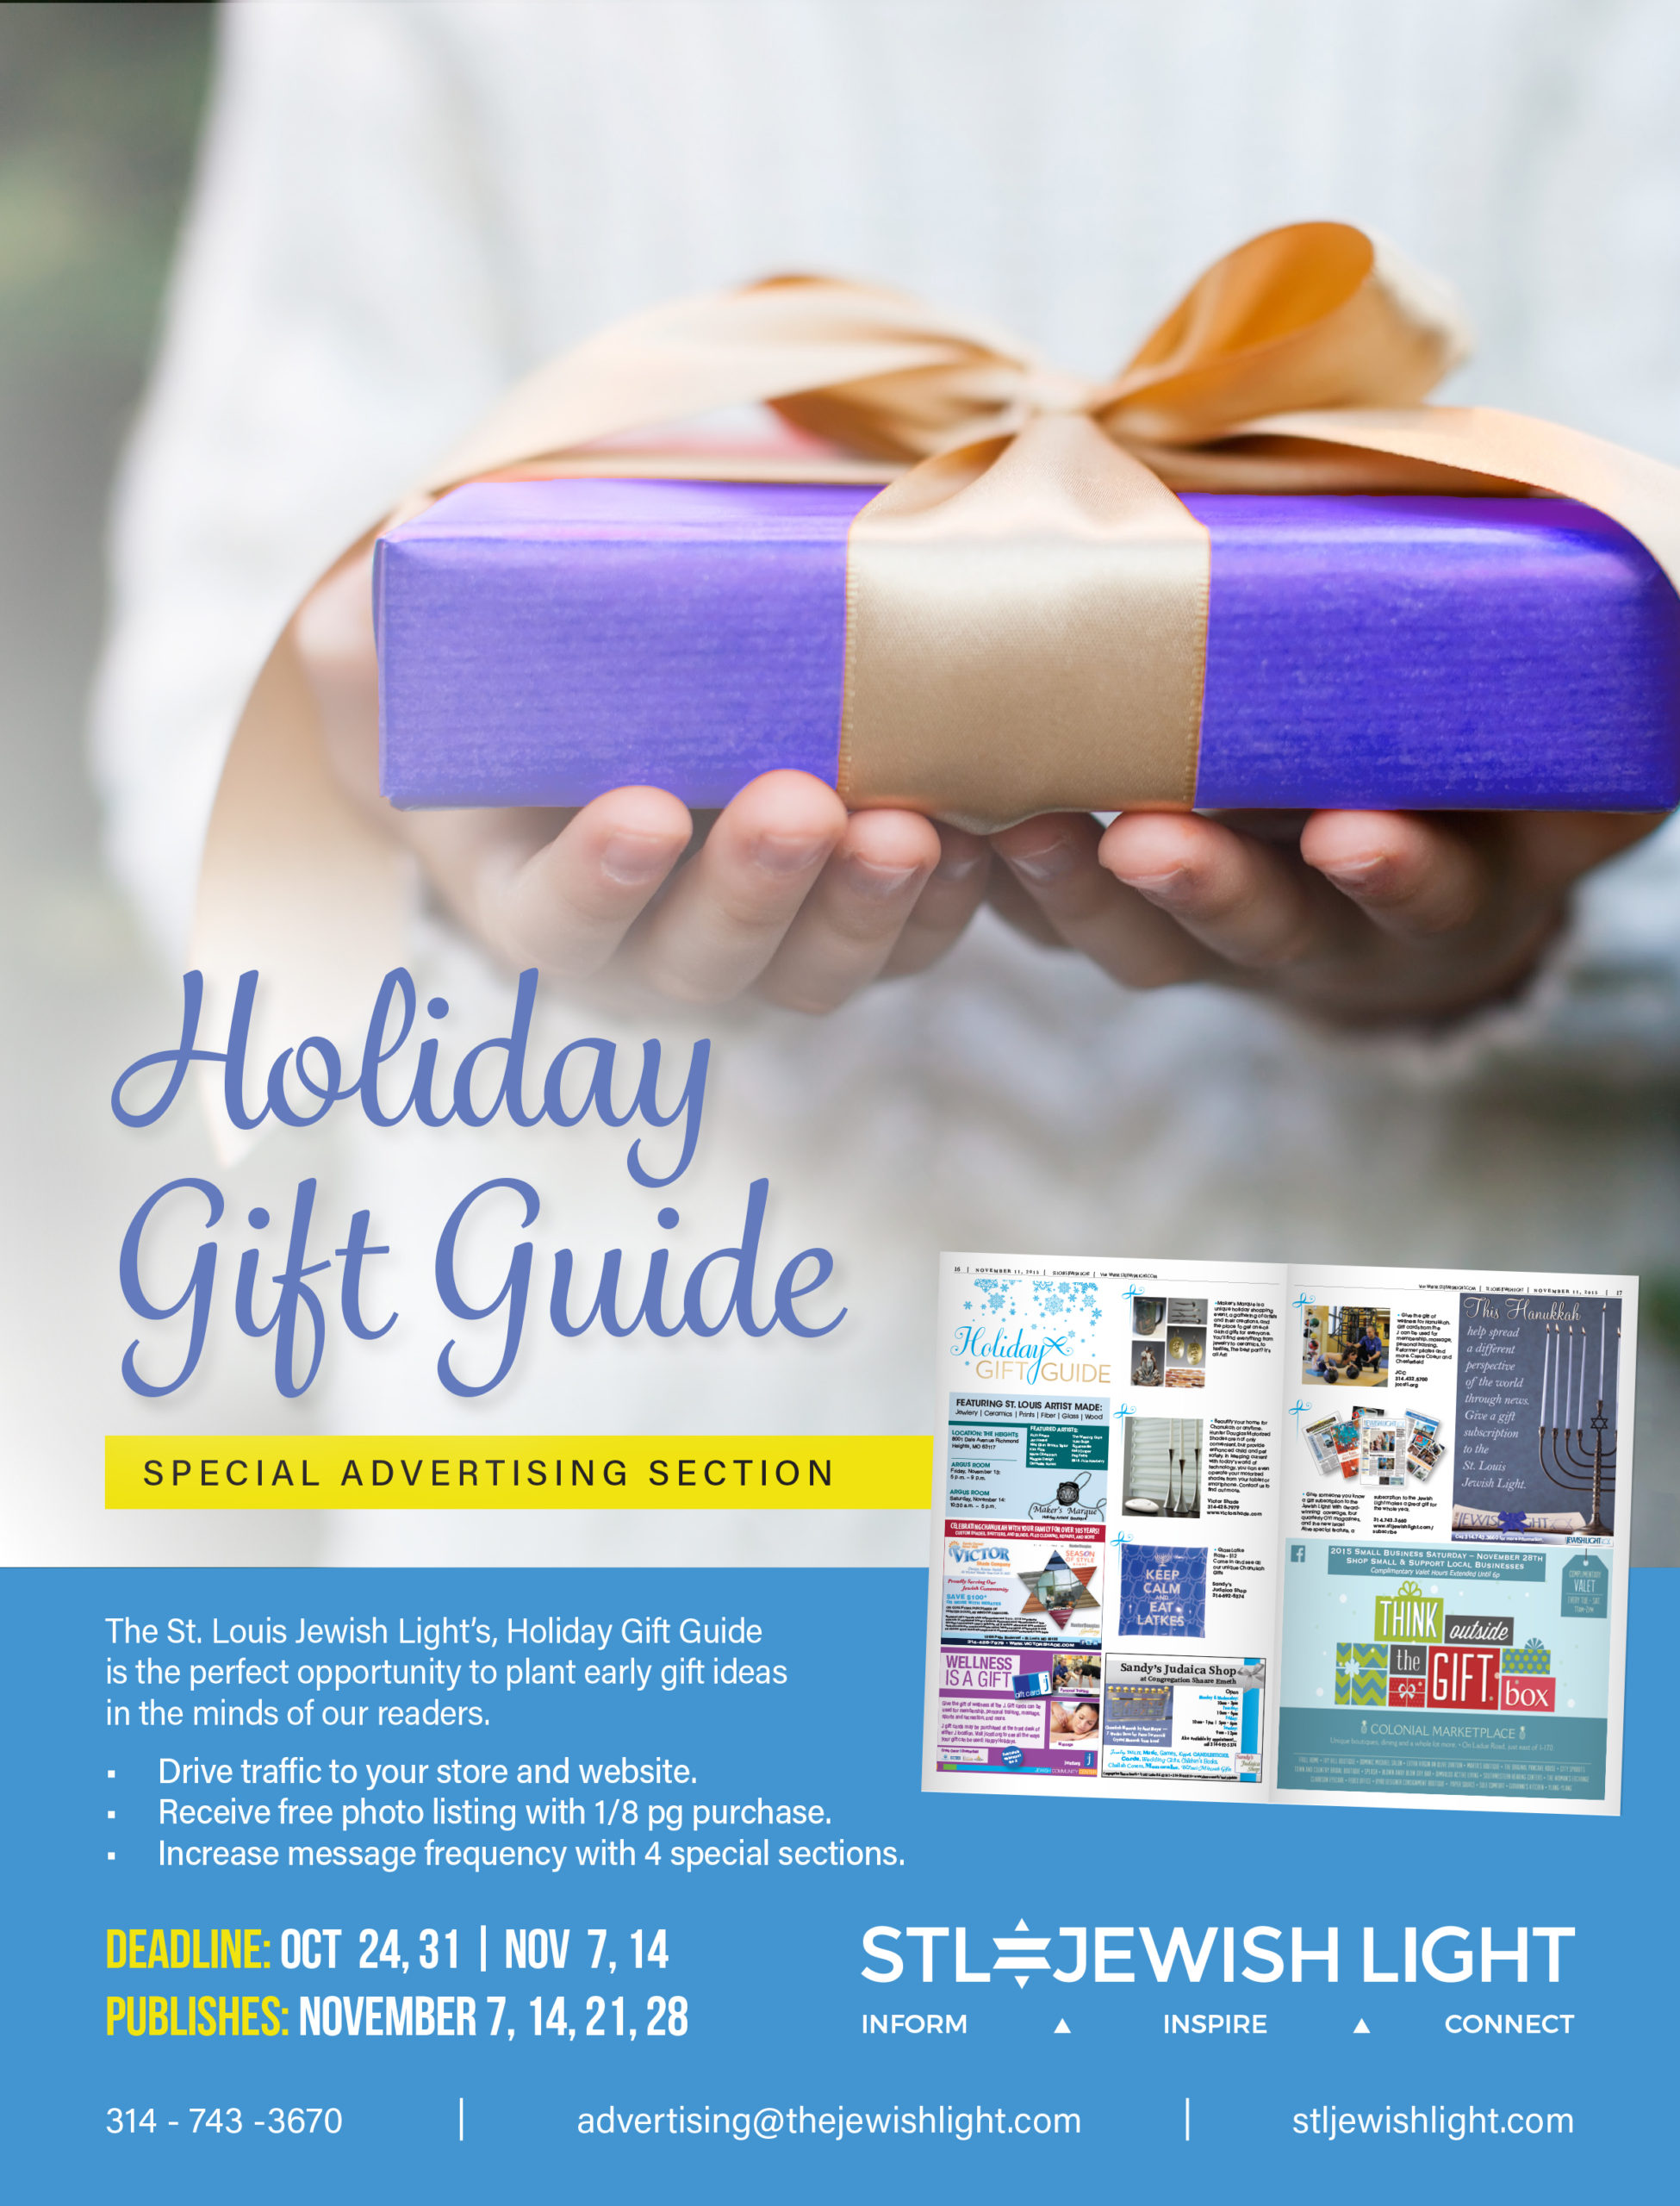 St. Louis Jewish Light - Advertising Design Holiday Gift Guide Flyer Portfolio Image - Designs by Martin Holloway